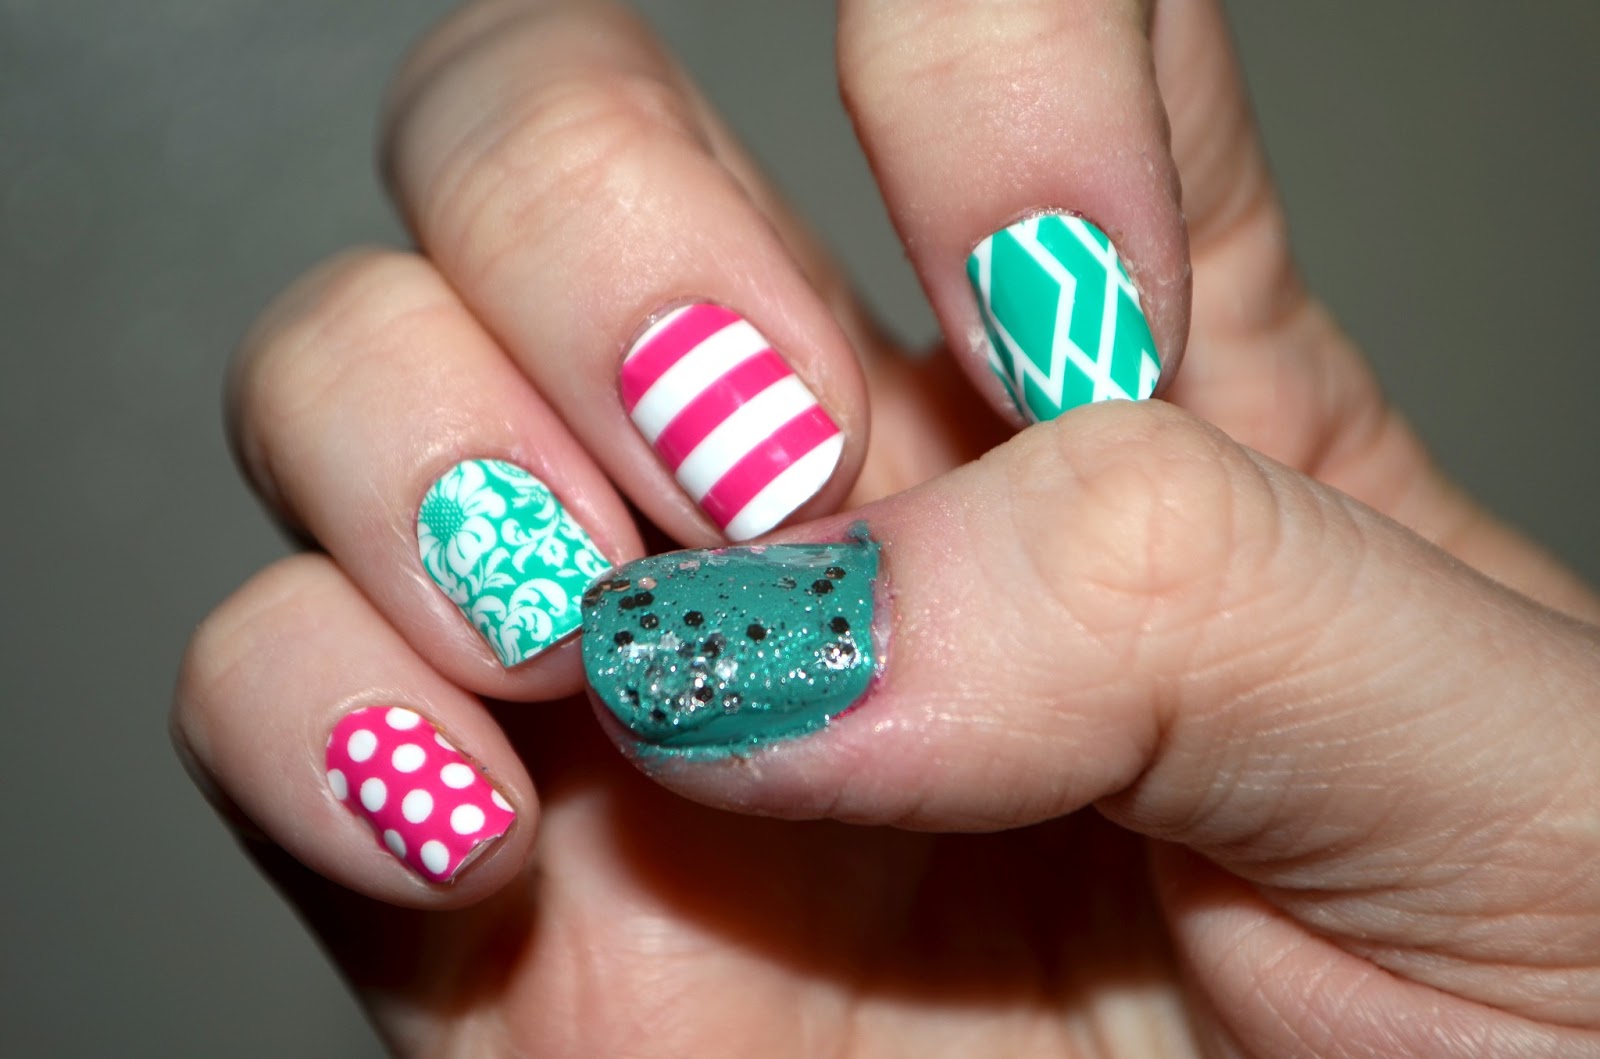 7. "Winter Beach Vacation" Nail Art Stickers by Jamberry - wide 3